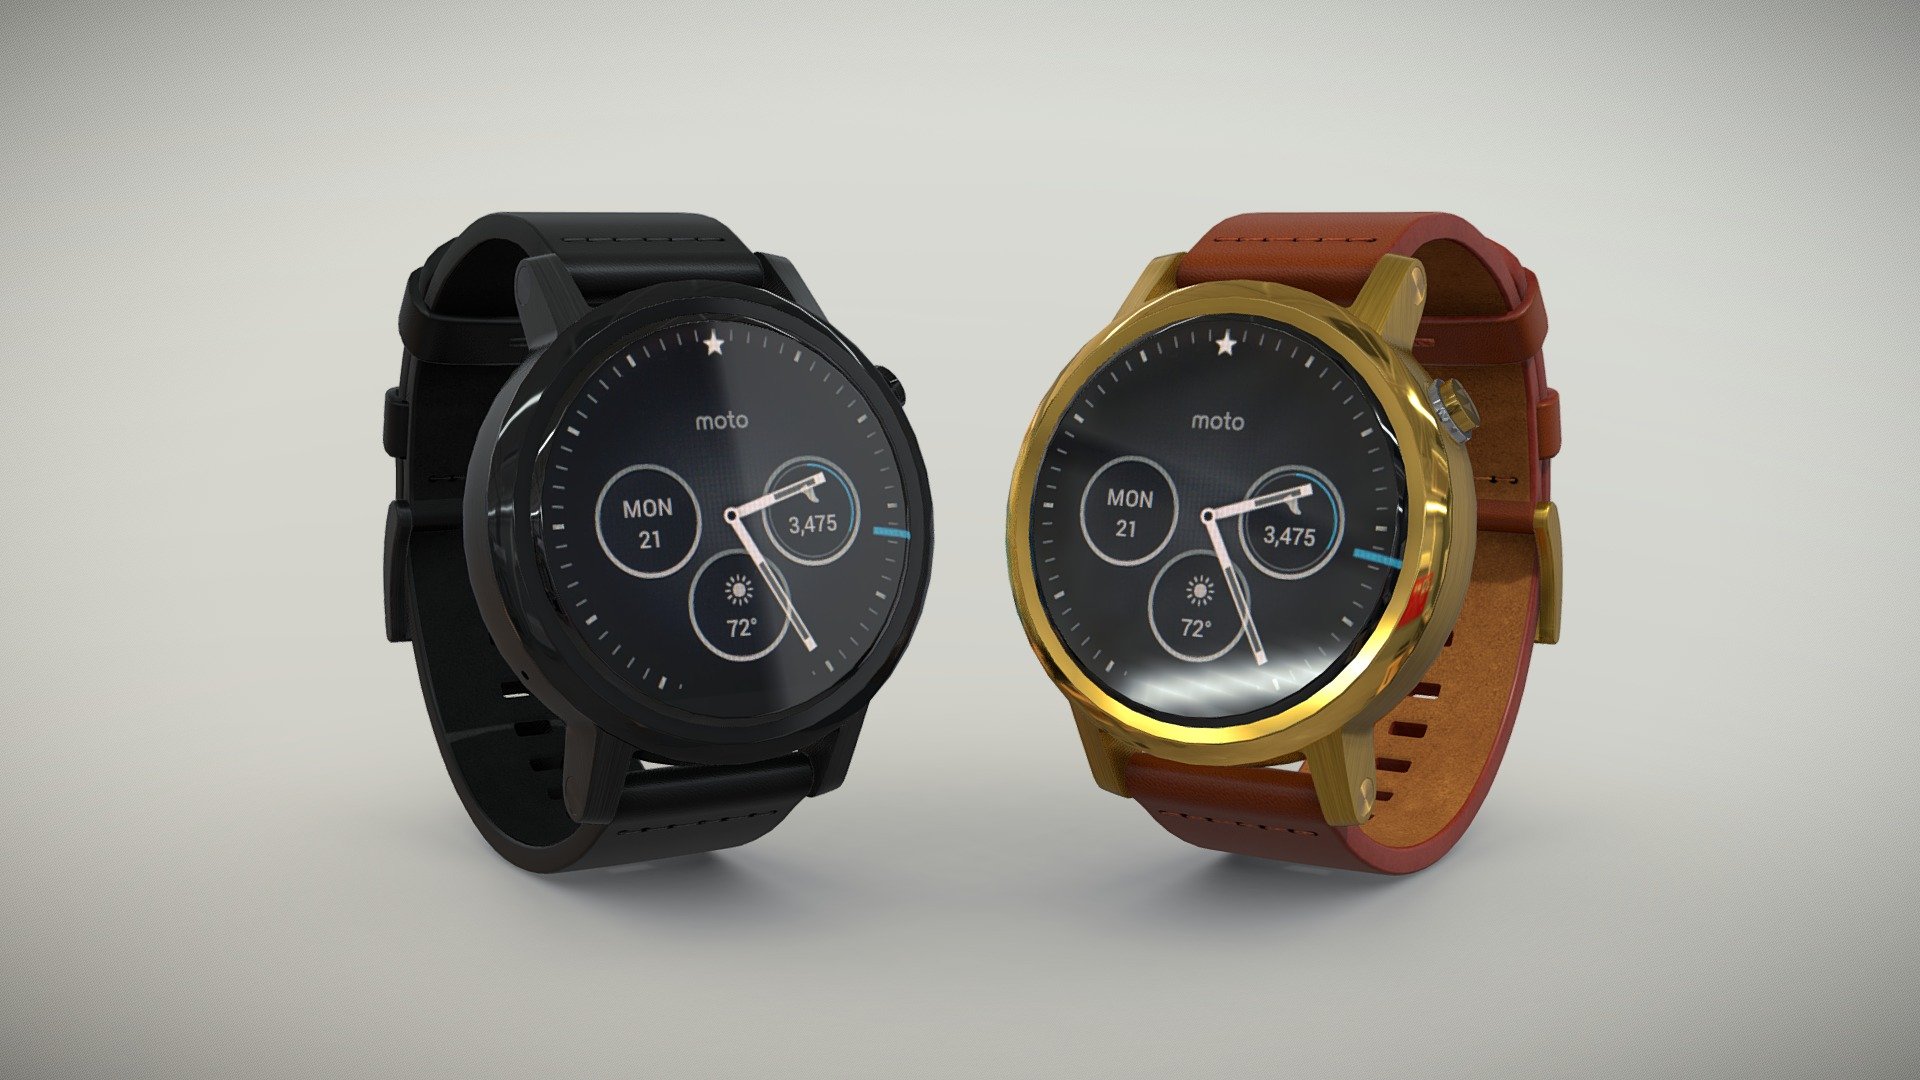 •   Let me present to you high-quality low-poly 3D model Motorola Moto 360 2nd Generation 42mm.  Model is presented in two colors: Cognac and Black. Modeling was made with ortho-photos of real watch that is why all details of design are recreated most authentically.

•    This model consists of one mesh, it is low-polygonal and it has only one material for each color version. 

•   The total of the main textures is 5. Resolution of all textures is 4096 pixels square aspect ratio in .png format. Also there is original texture file .PSD format in separate archive.

•   Polygon count of the model is – 6012.

•   The model has correct dimensions in real-world scale. All parts grouped and named correctly.

•   To use the model in other 3D programs there are scenes saved in formats .fbx, .obj, .DAE, .max (2010 version).

Note: If you see some artifacts on the textures, it means compression works in the Viewer. We recommend setting HD quality for textures. But anyway, original textures have no artifacts 3d model